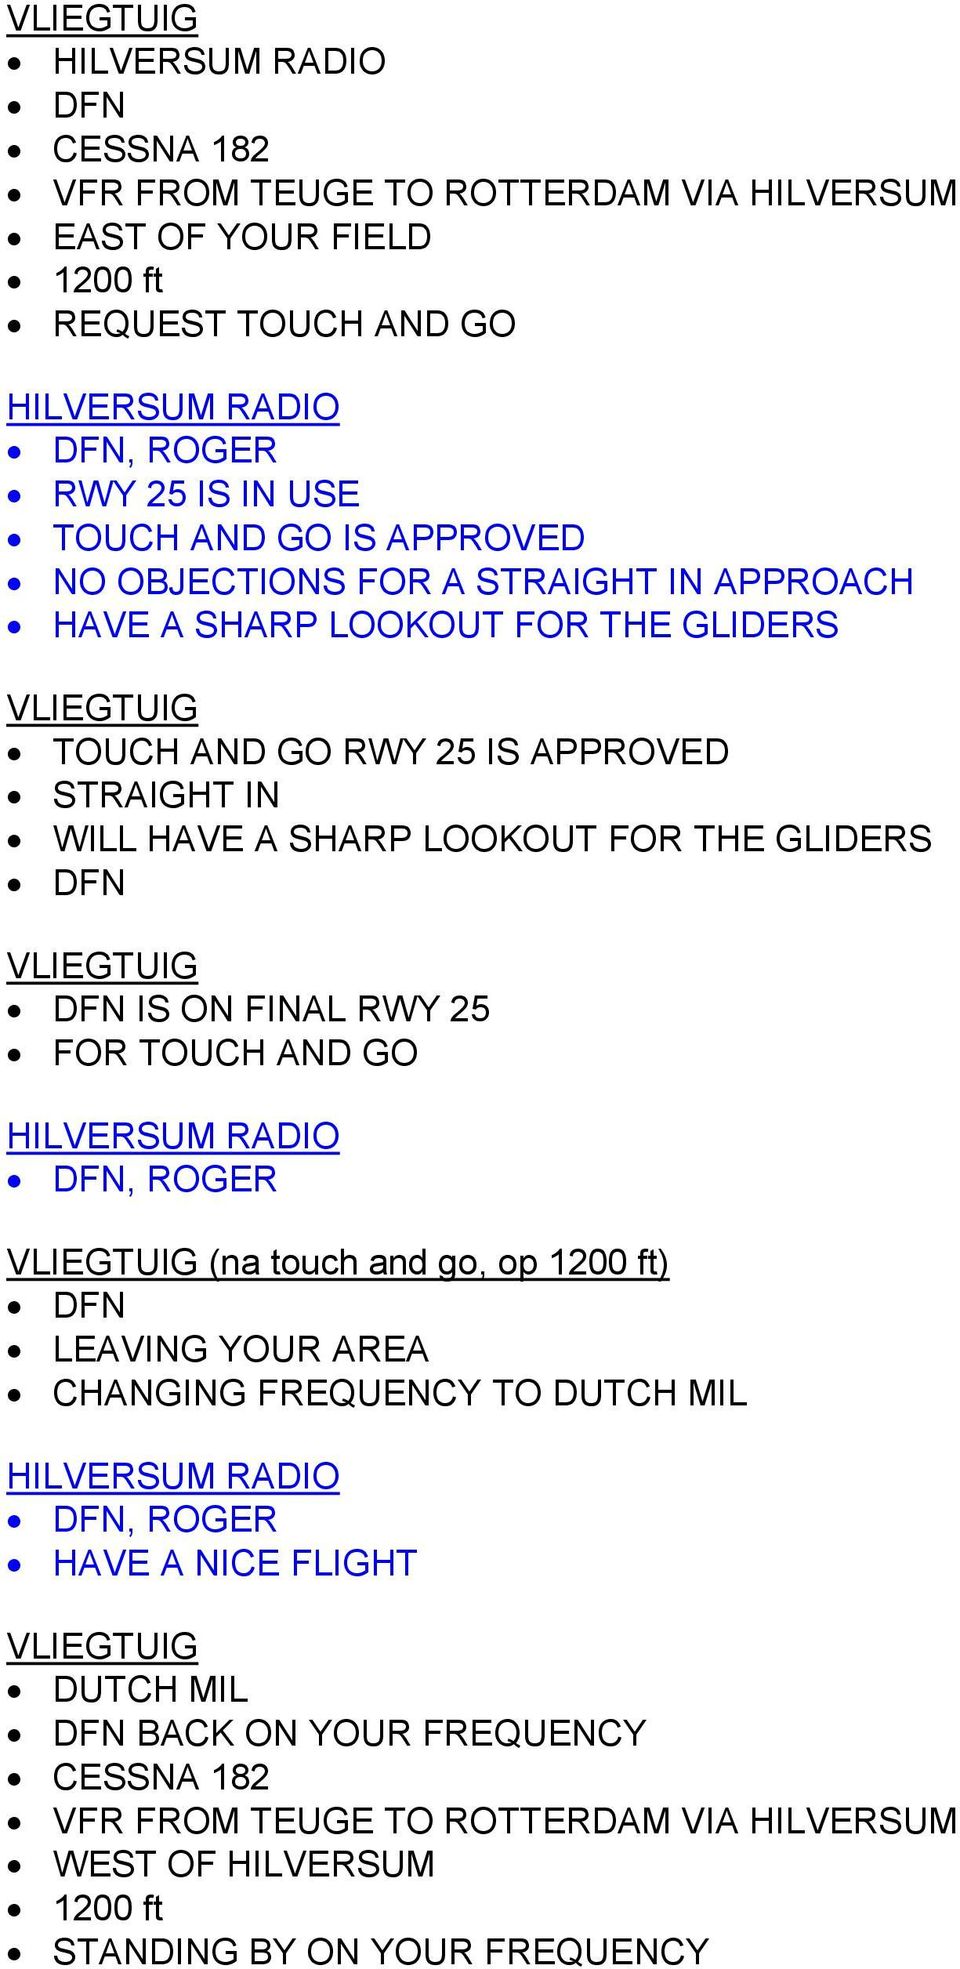 LOOKOUT FOR THE GLIDERS IS ON FINAL RWY 25 FOR TOUCH AND GO HILVERSUM RADIO, ROGER (na touch and go, op 1200 ft) LEAVING YOUR AREA CHANGING FREQUENCY TO